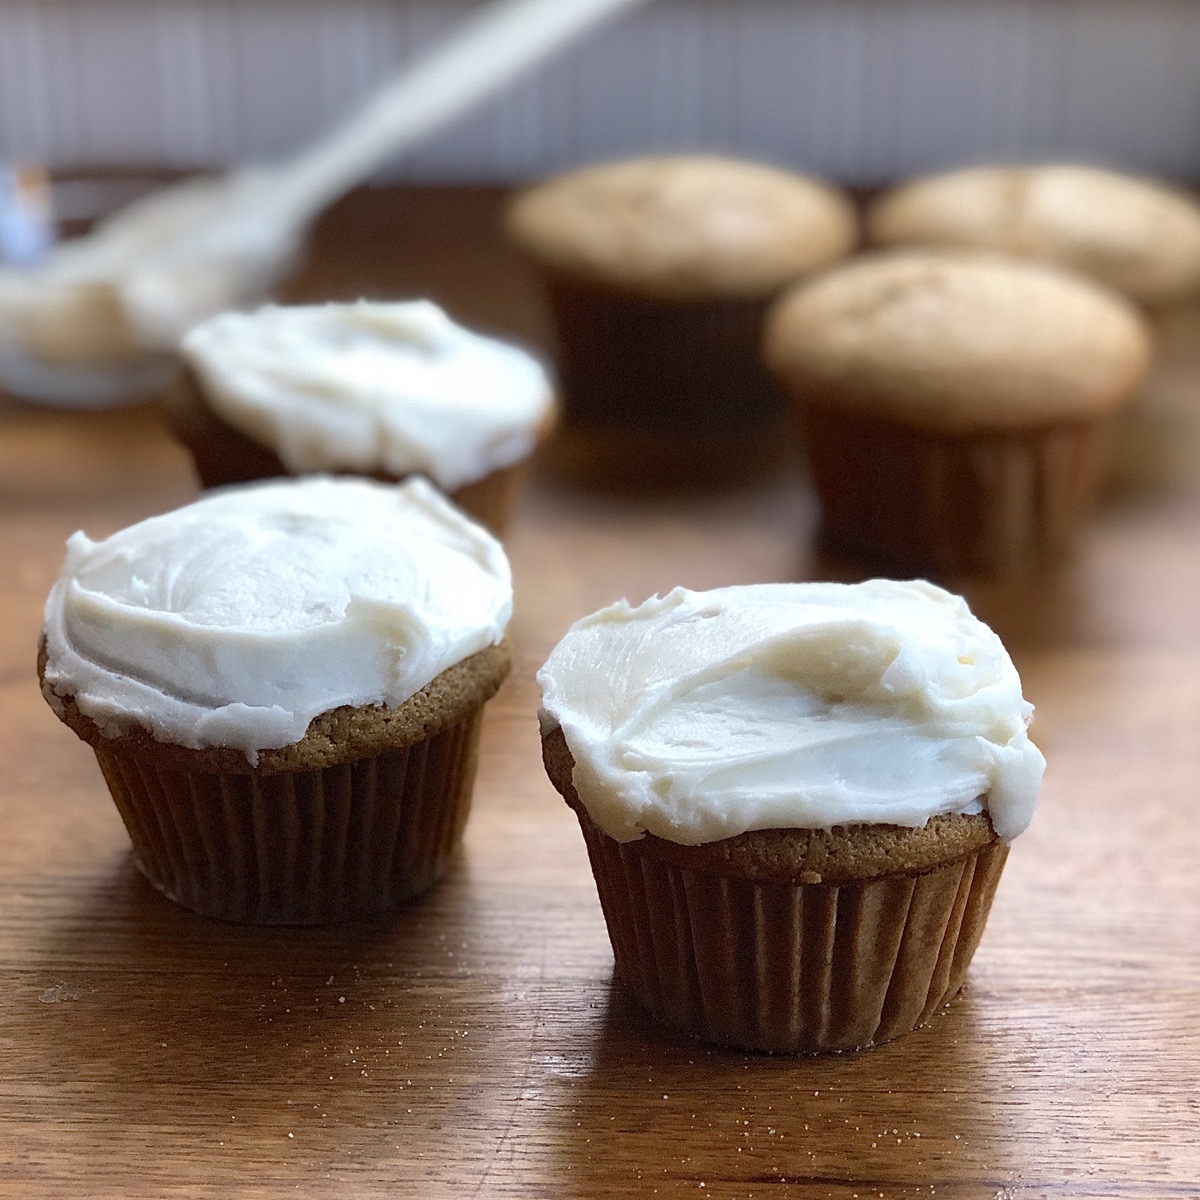 Gingerbread cupcakes with vanilla icing.